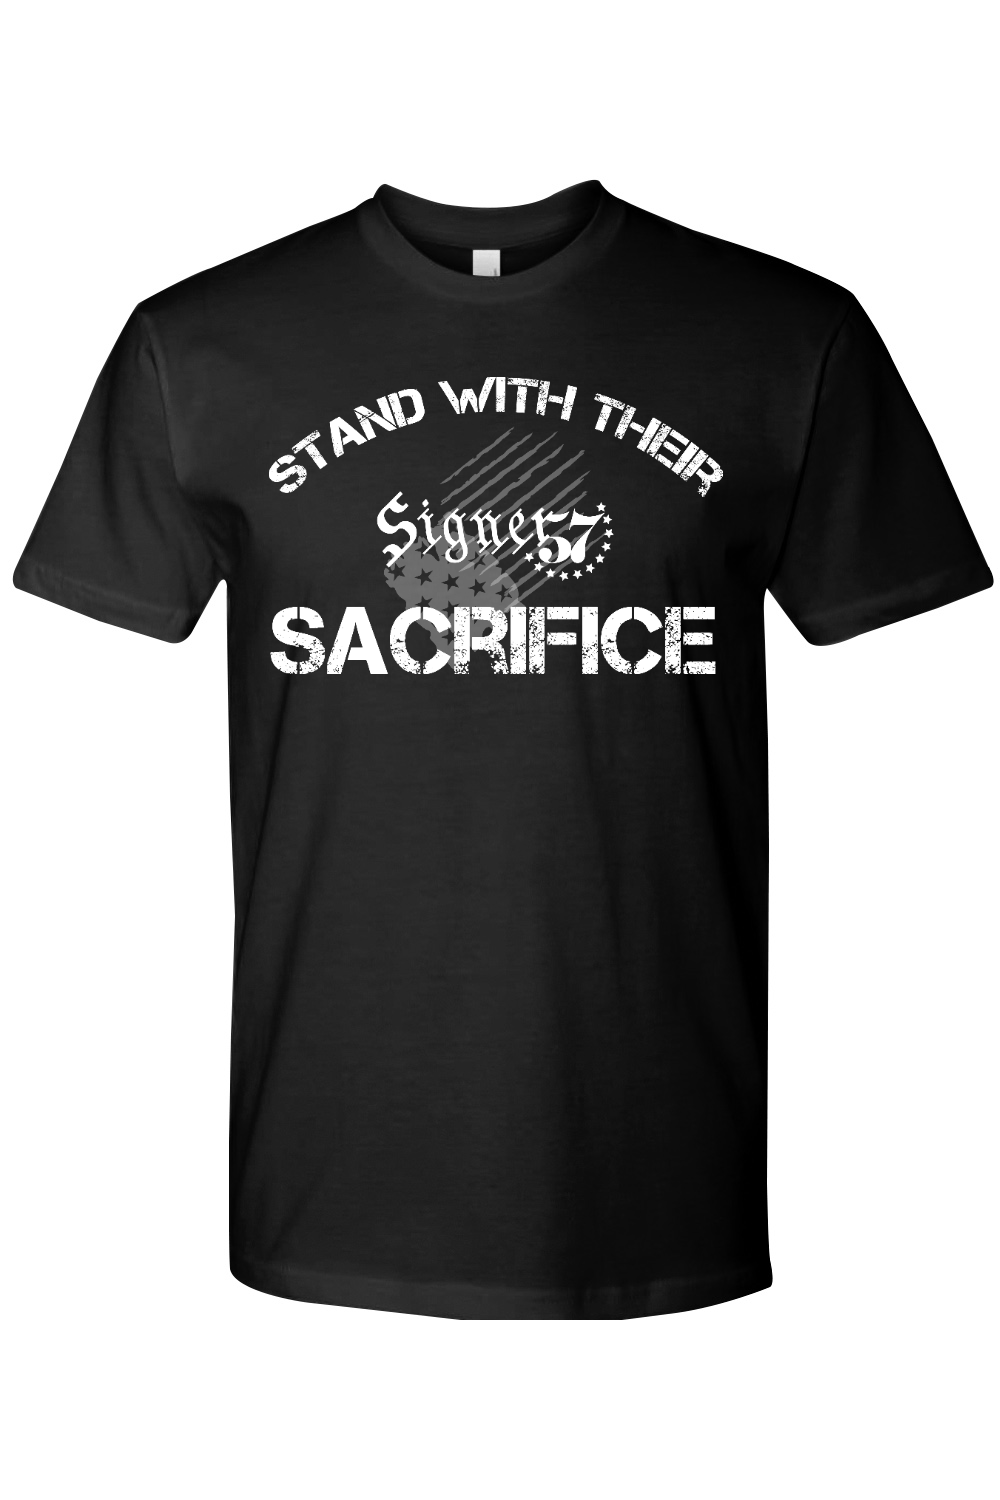 UNISEX T-Shirt - Stand With Their Sacrifice